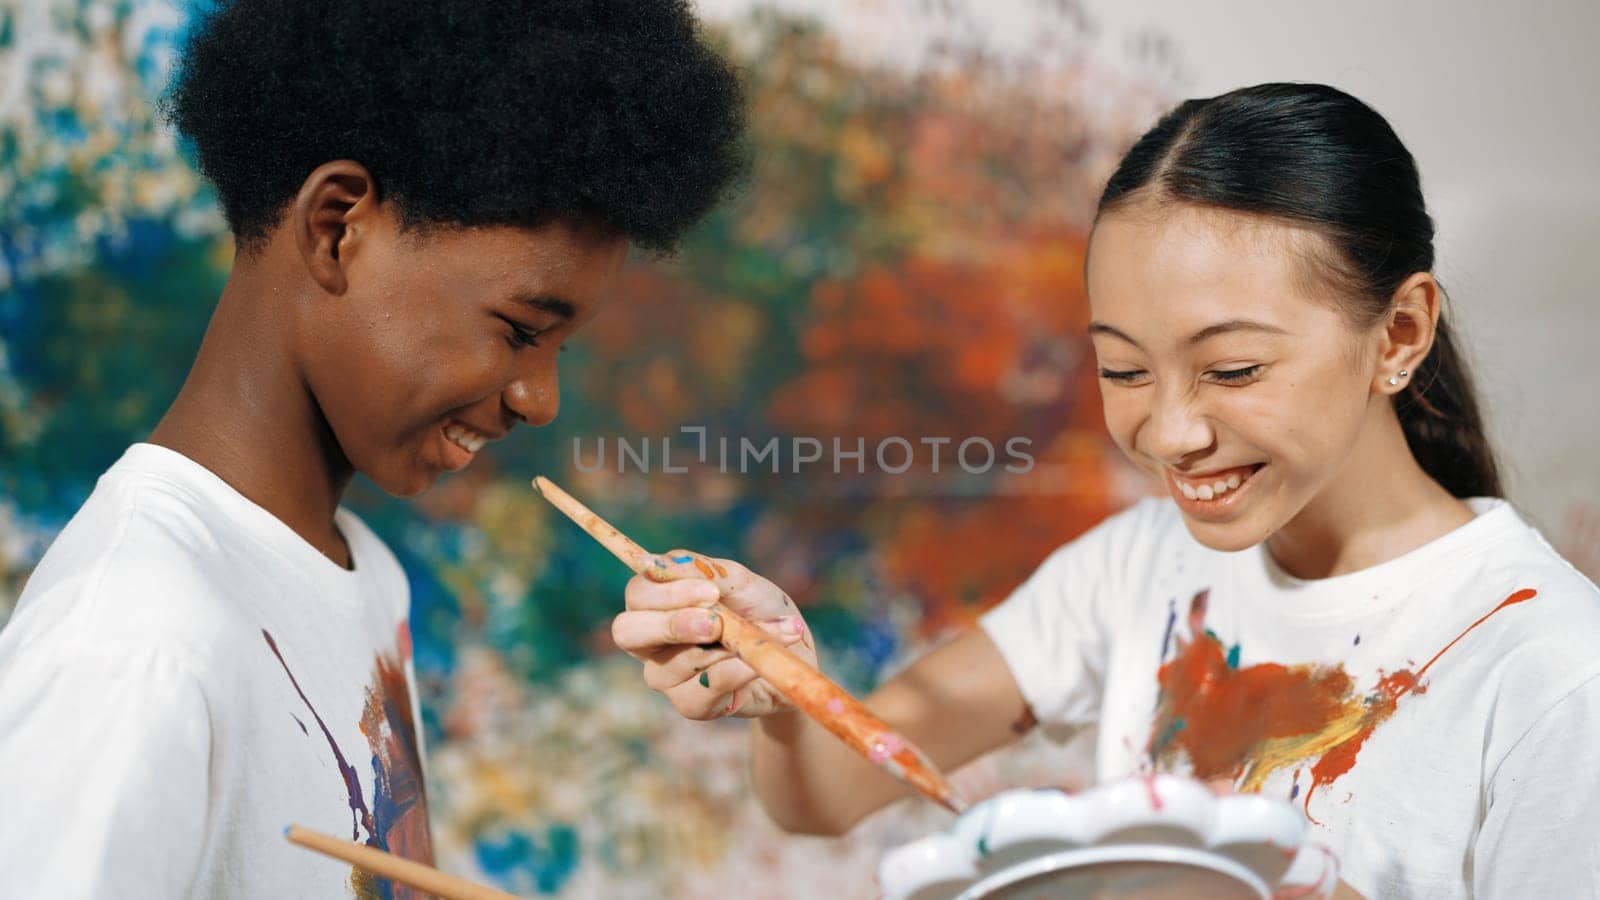 Smiling diverse children paint color on each other shirt at wall. Edification. by biancoblue